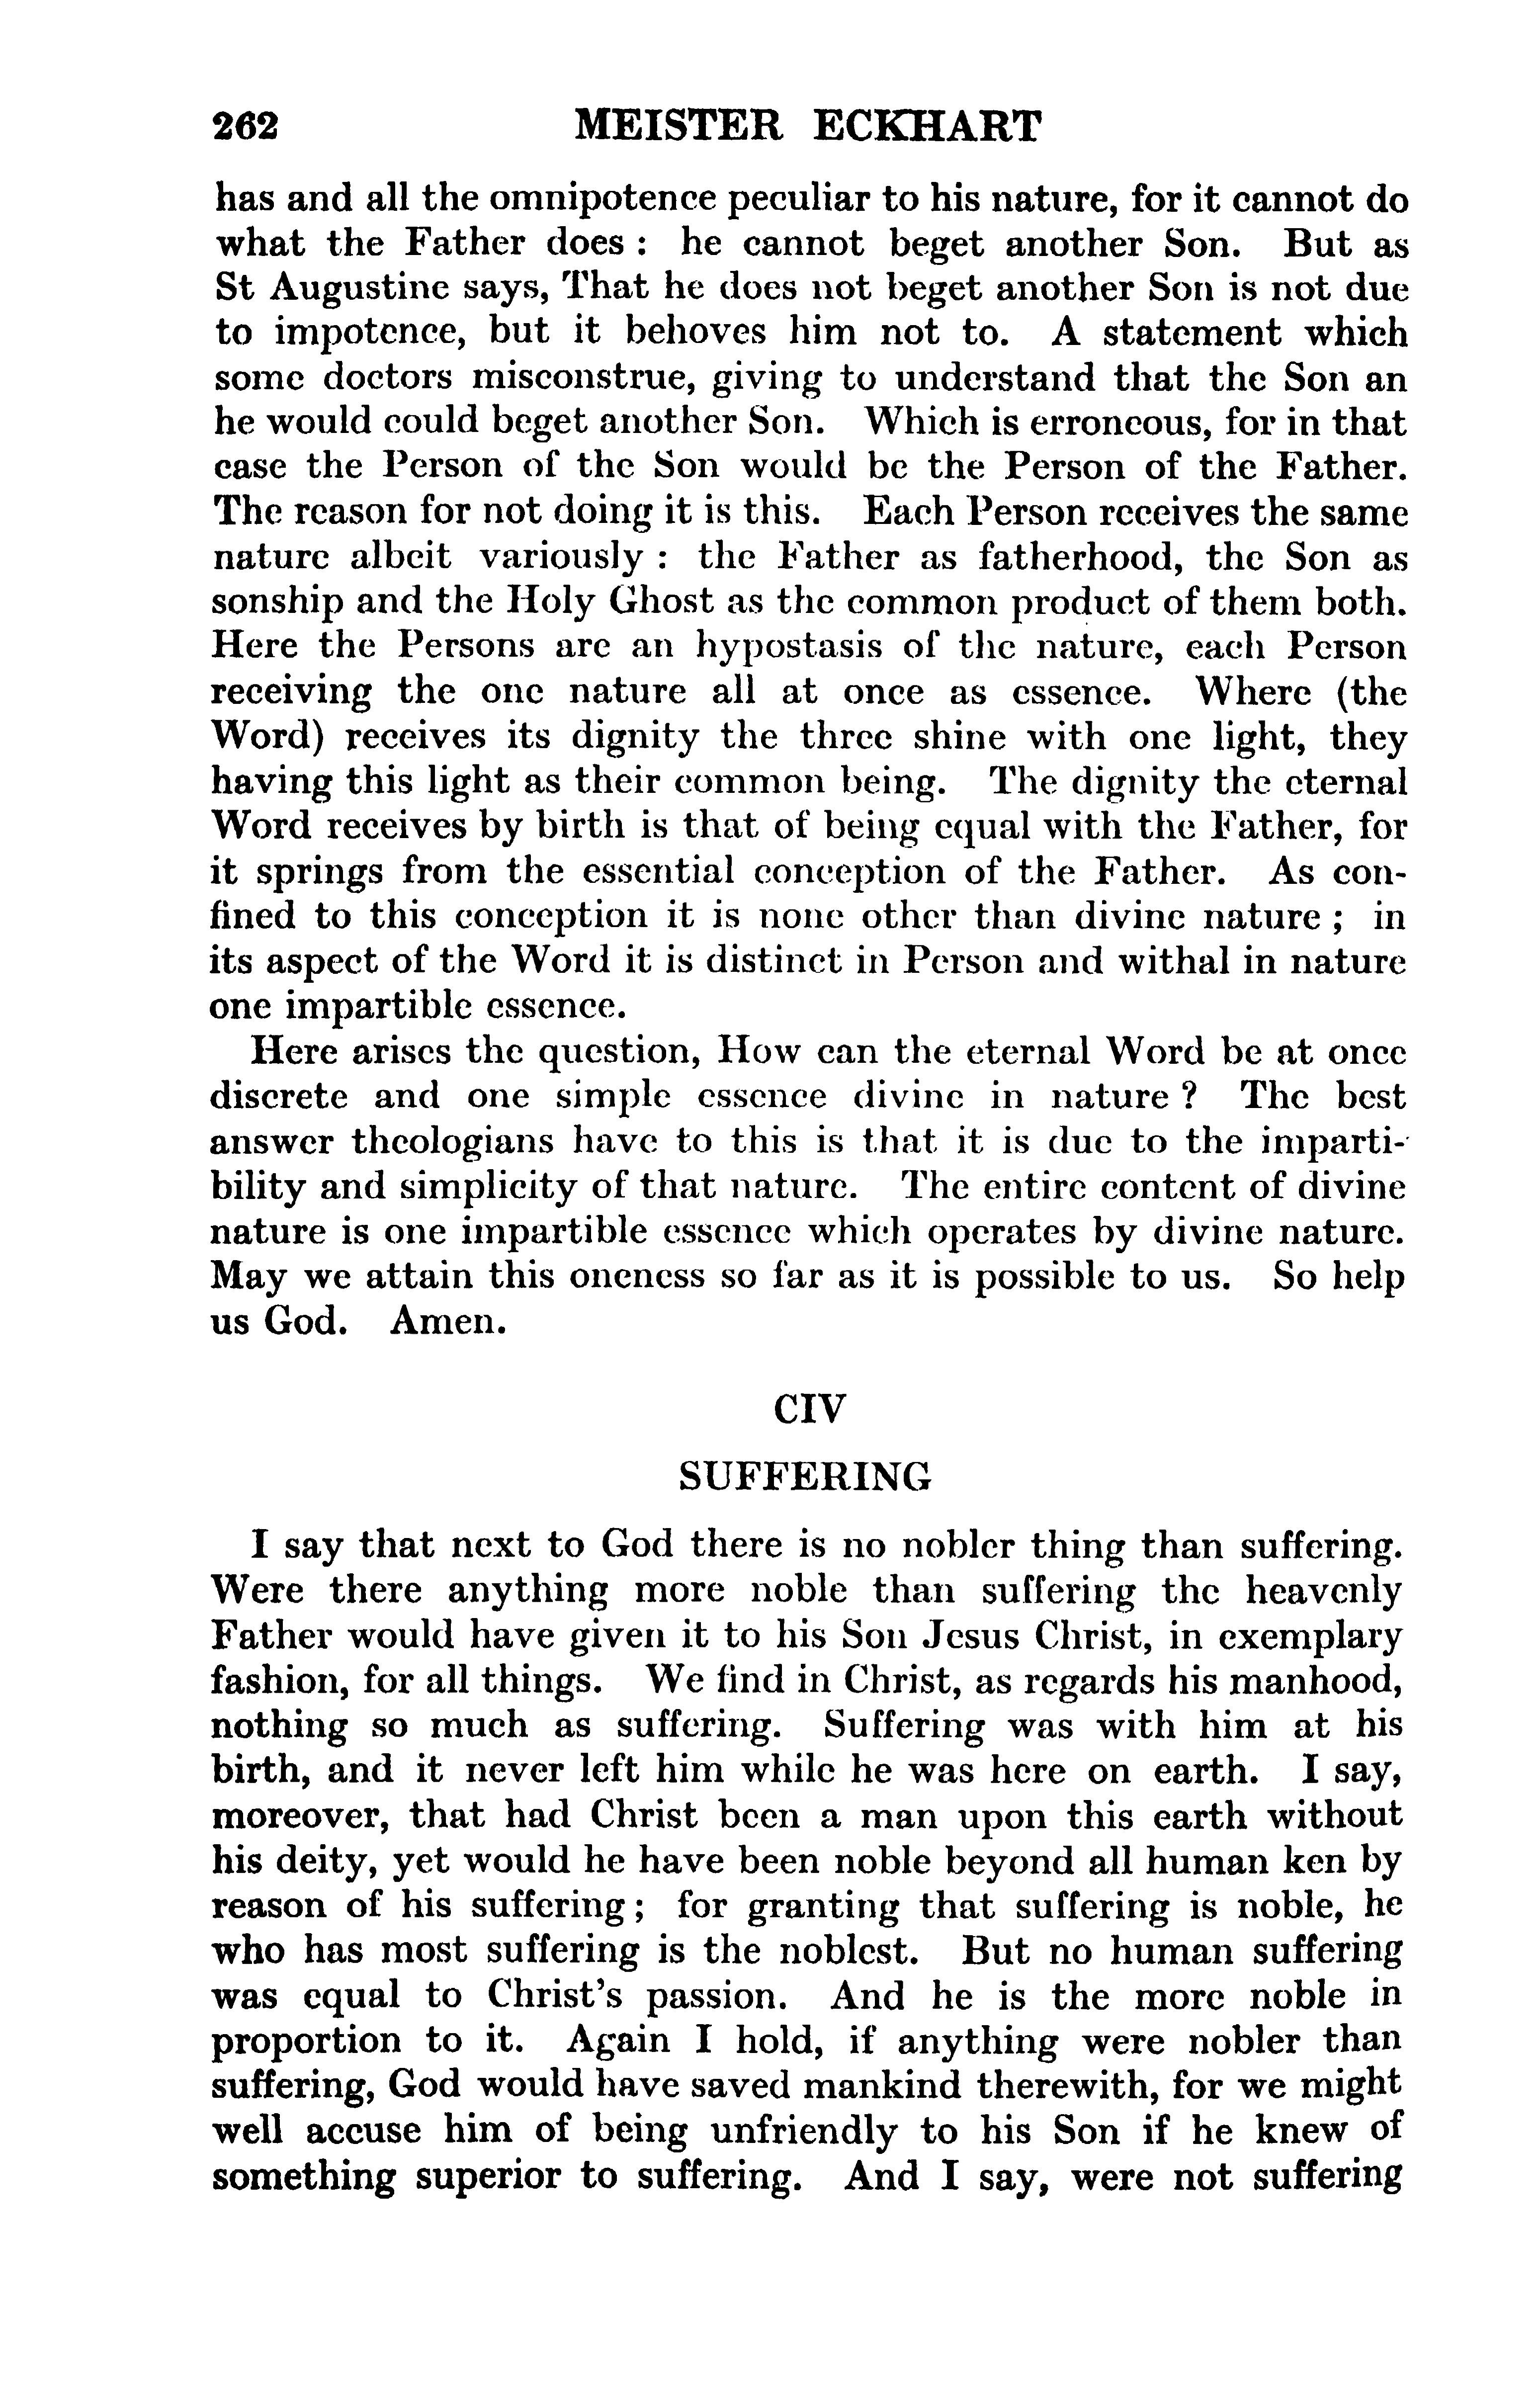 Image of page 0286